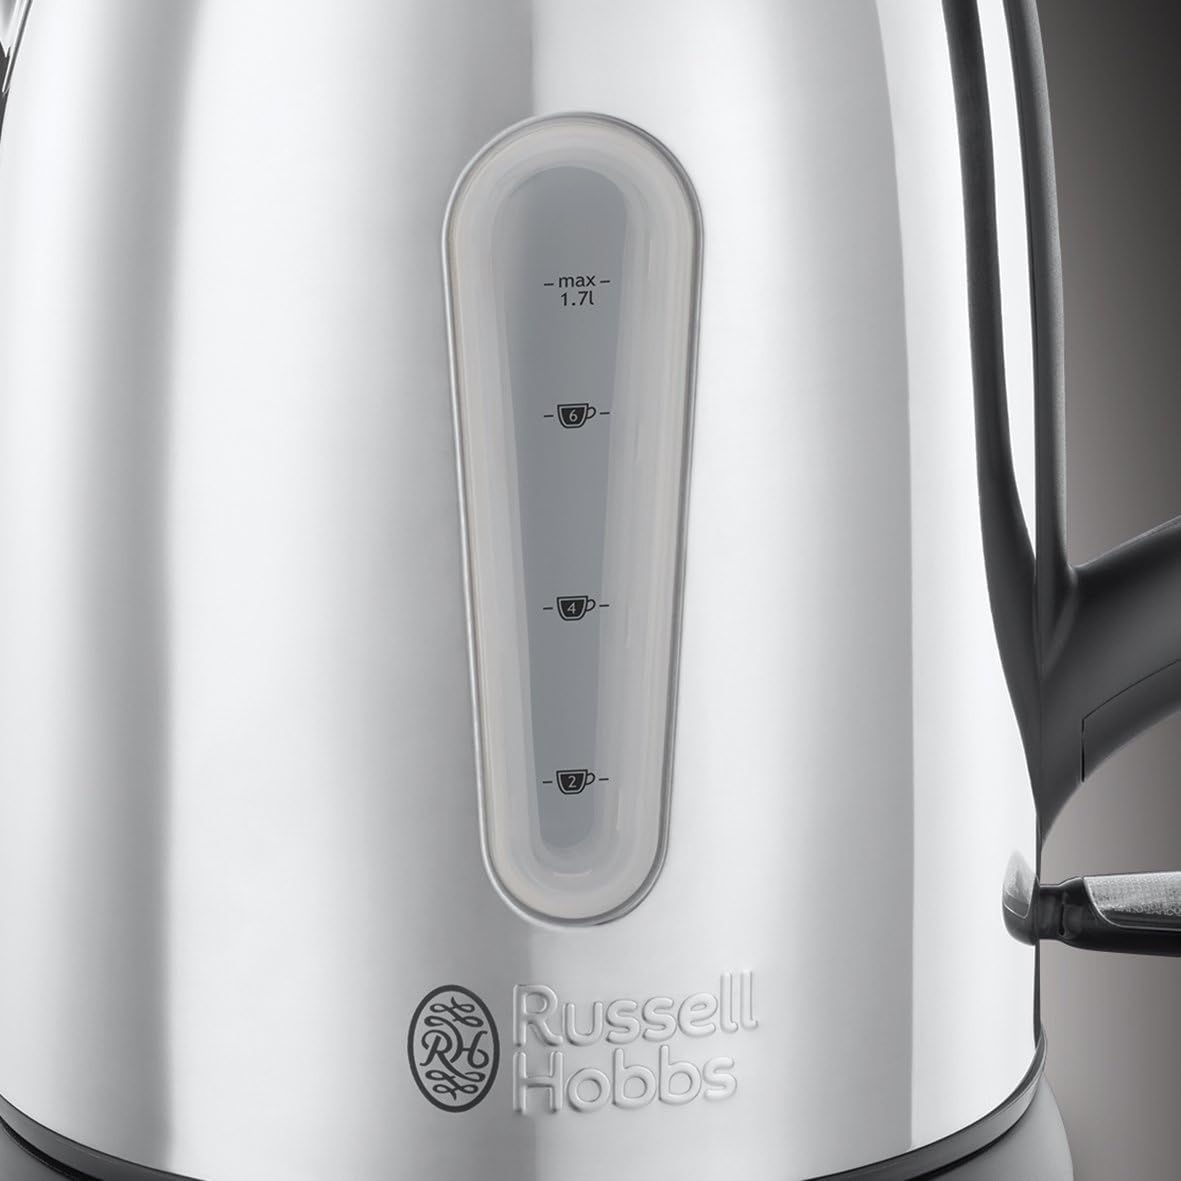 Russell Hobbs Coniston Electric Kettle, 1.7L Capacity 3000W Sleek Stainless Steel Design with Rapid Boil, Removable Filter, Perfect for Warm Beverages for Home & Office use – 23760 (Silver)